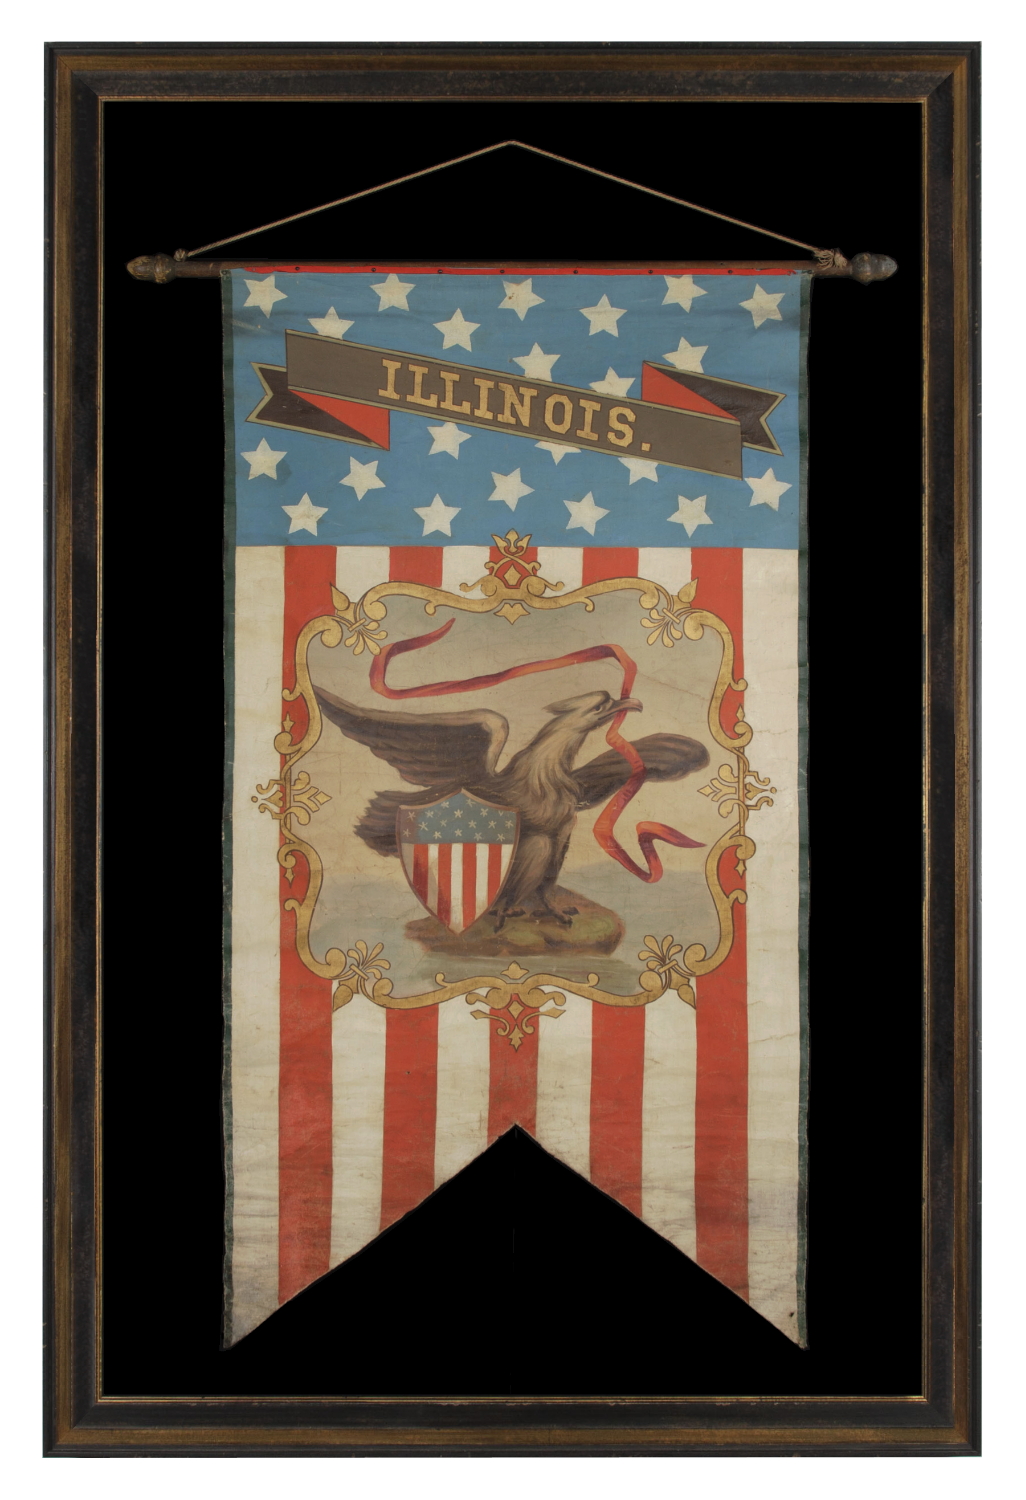 HAND-PAINTED PATRIOTIC BANNER WITH THE SEAL OF THE STATE OF ILLINOIS AND GREAT FOLK QUALITIES HAND-PAINTED PATRIOTIC BANNER WITH THE SEAL OF THE STATE OF OREGON AND GREAT FOLK QUALITIES, PROBABLY MADE FOR THE 1868 DEMOCRAT NATIONAL CONVENTION IN NEW YORK CITY